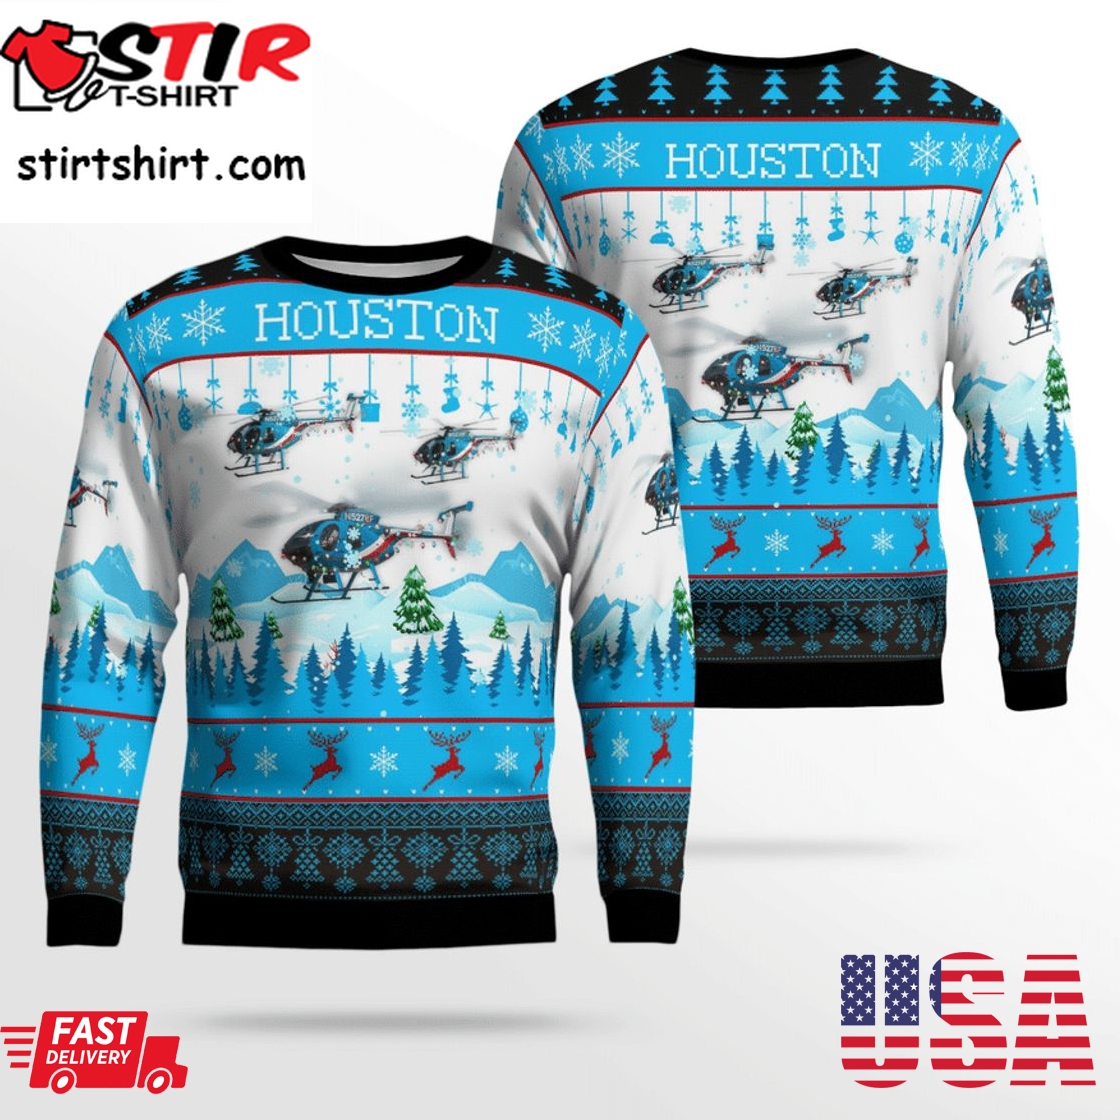 Hot Houston Police Helicopter 78F N5278f 3D Christmas Sweater